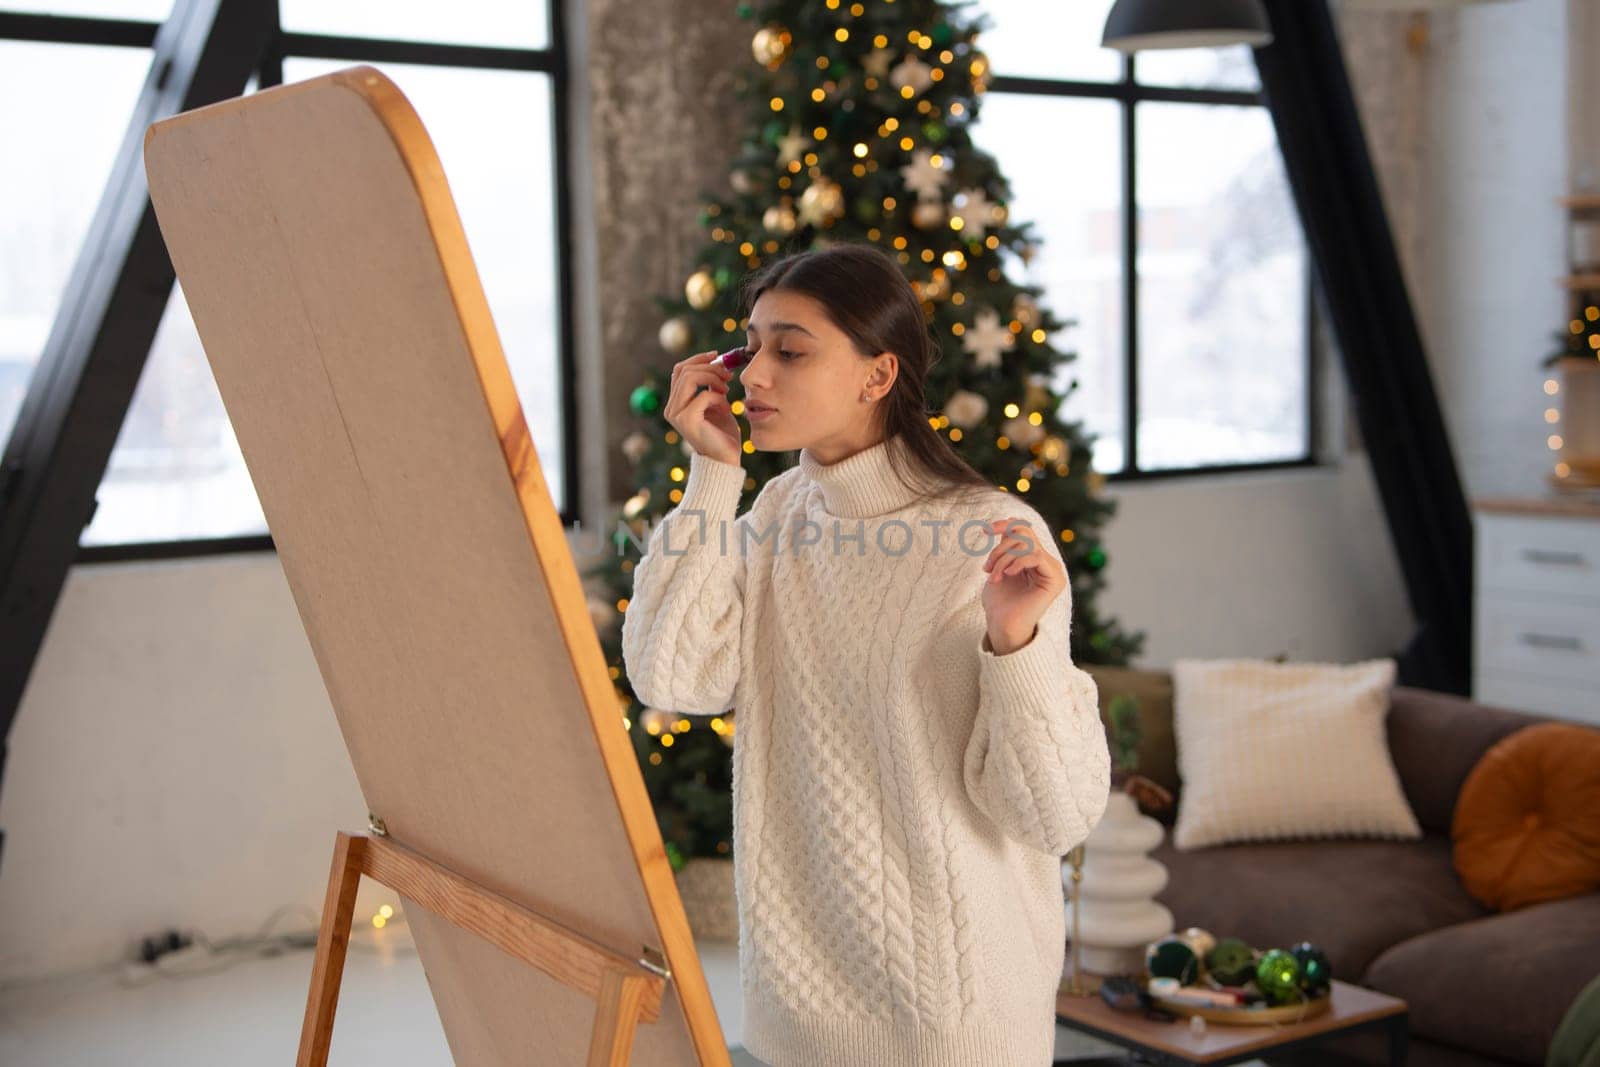 Creating a festive mood, a beautiful young woman does makeup in a Christmas setting. by teksomolika